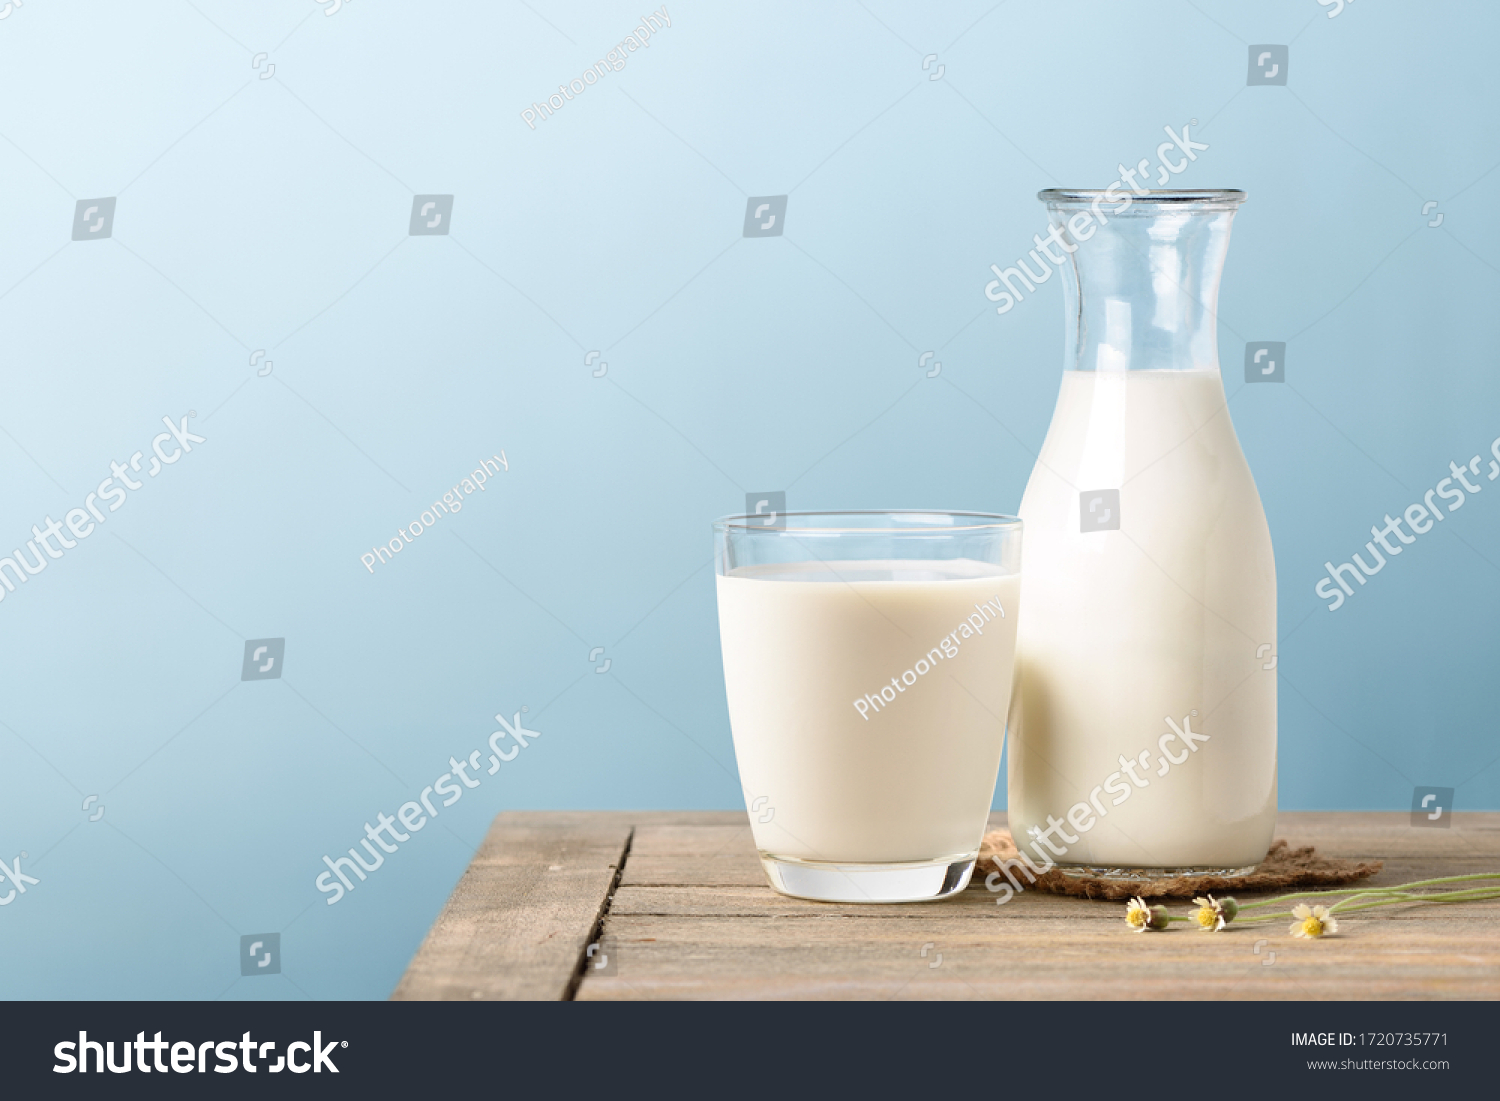 A glass and bottle of milk on wooden table with light blue background. #1720735771